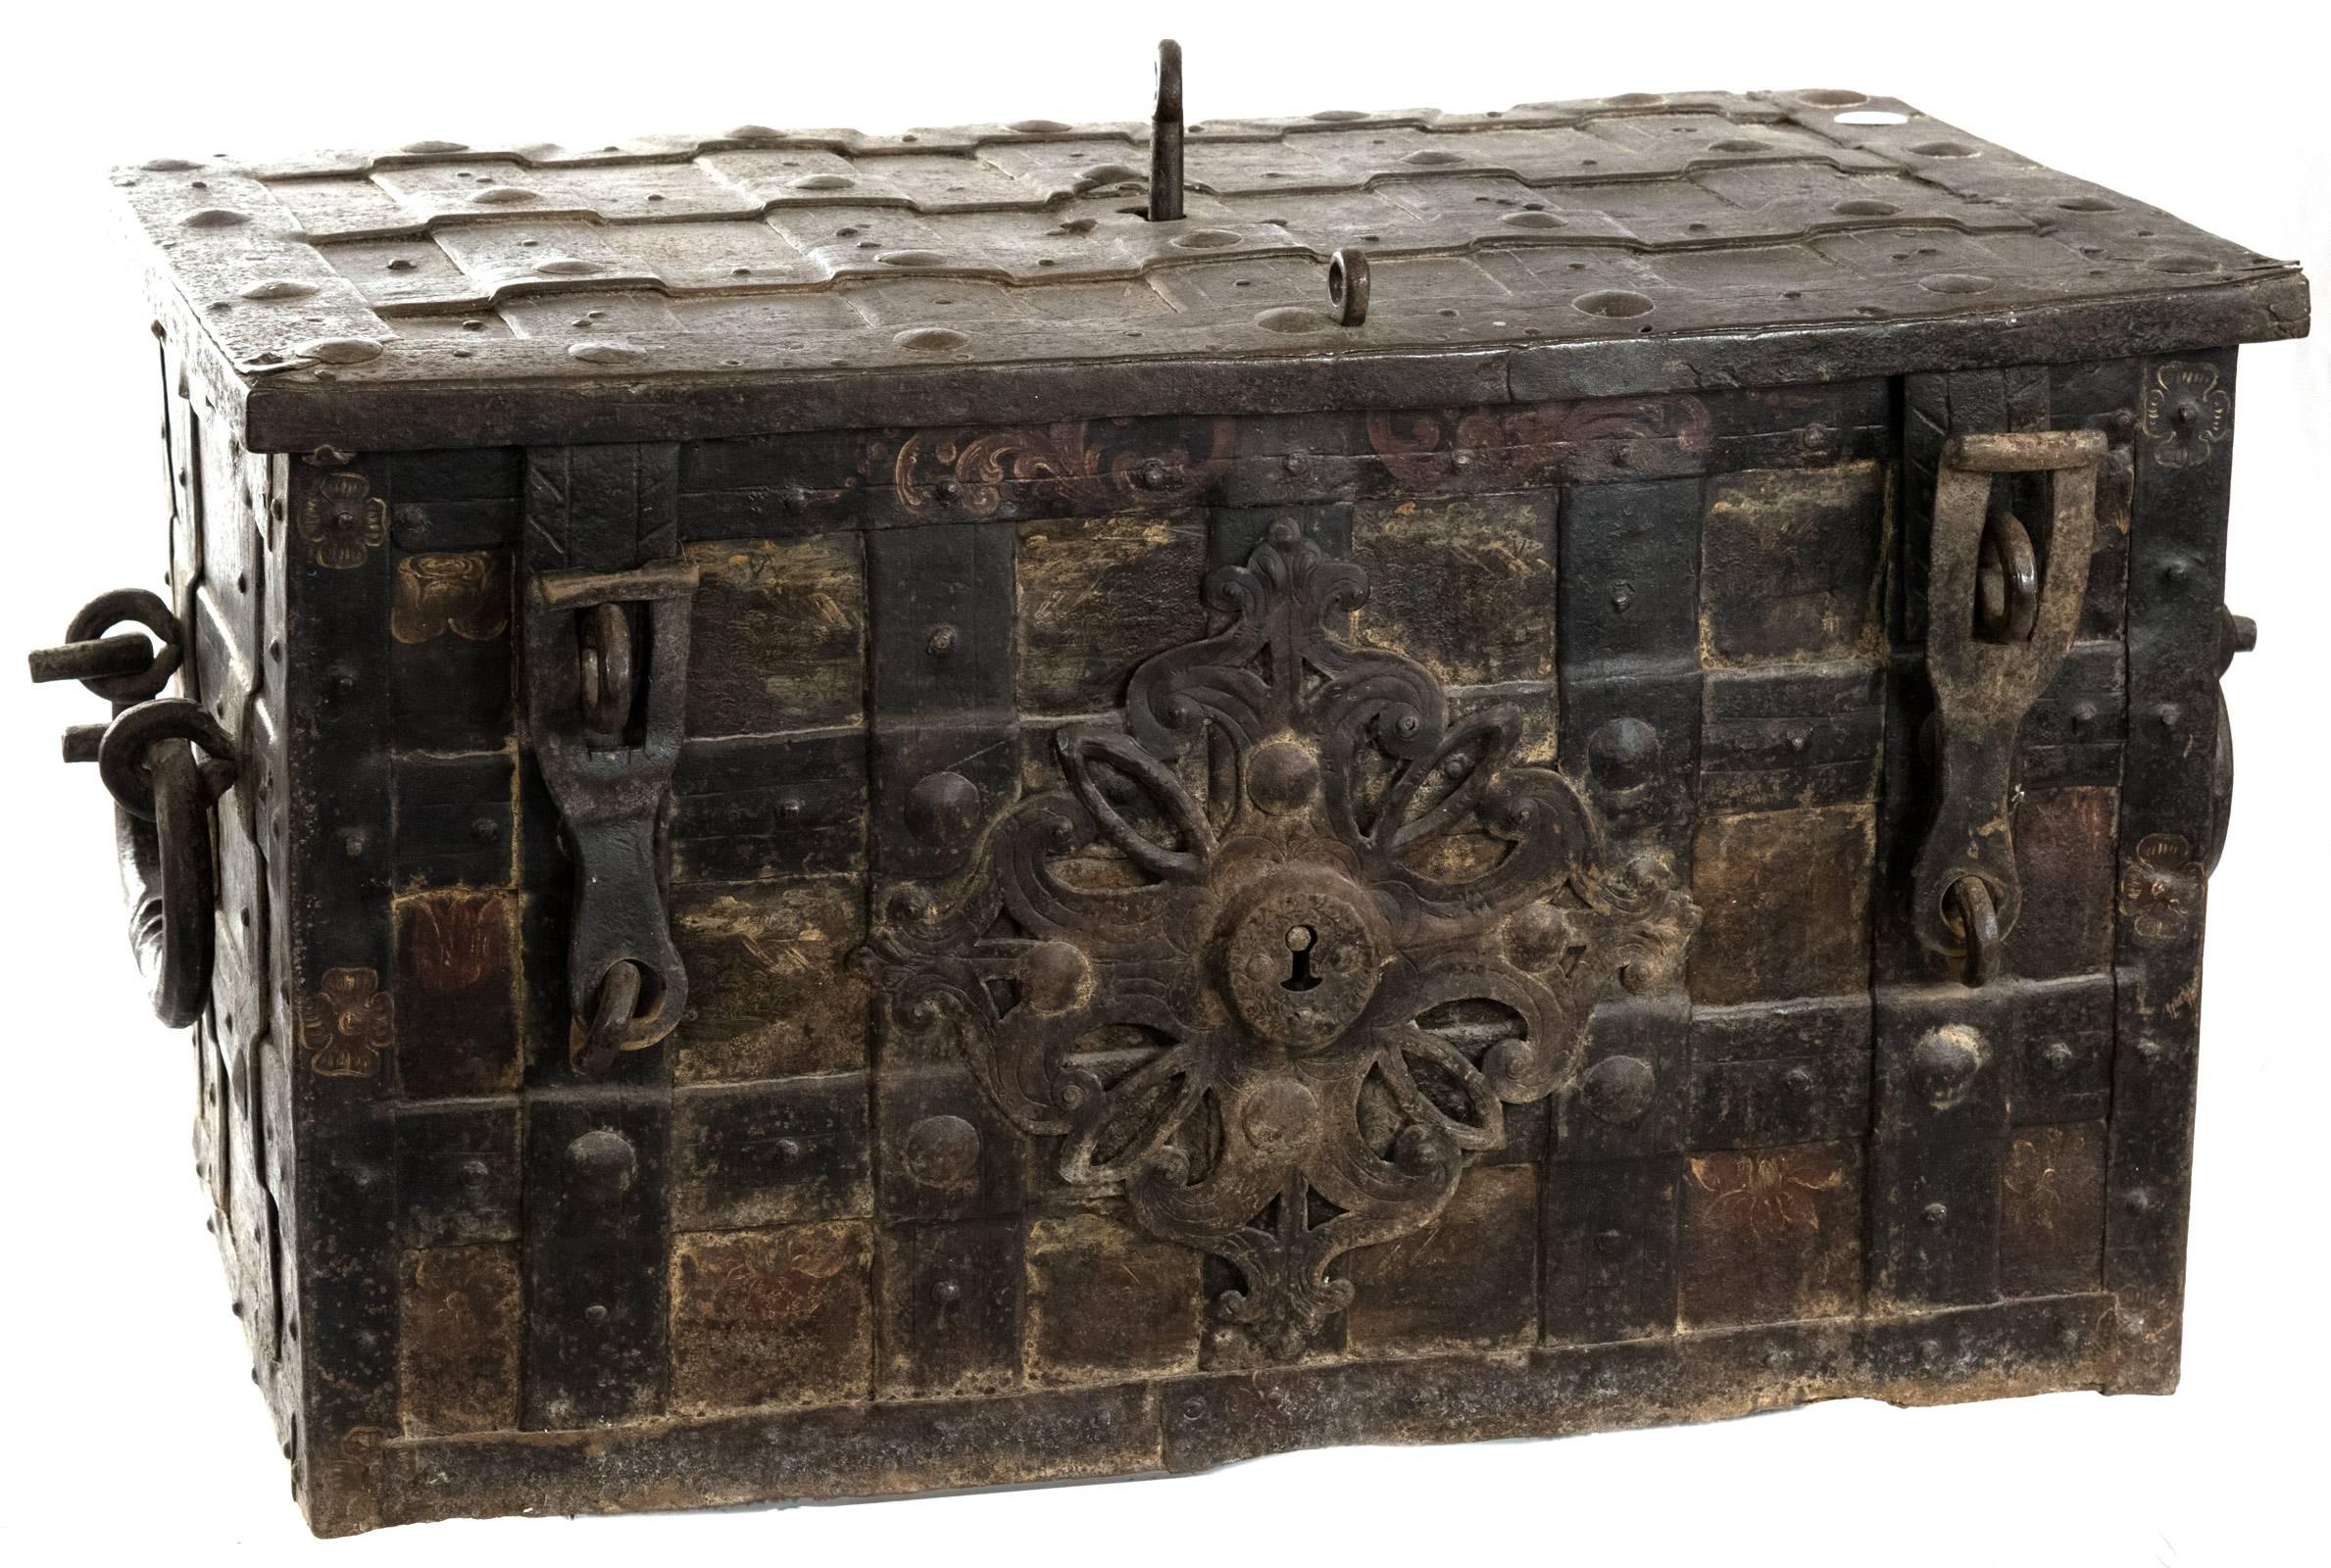 An iron chest of rectangular form bound in studded iron straps around decoratively painted floral panels, the centred top lock with key shooting bolts. The front having two hasps with padlocks and a pierced quatrefoil escutcheon with engraved